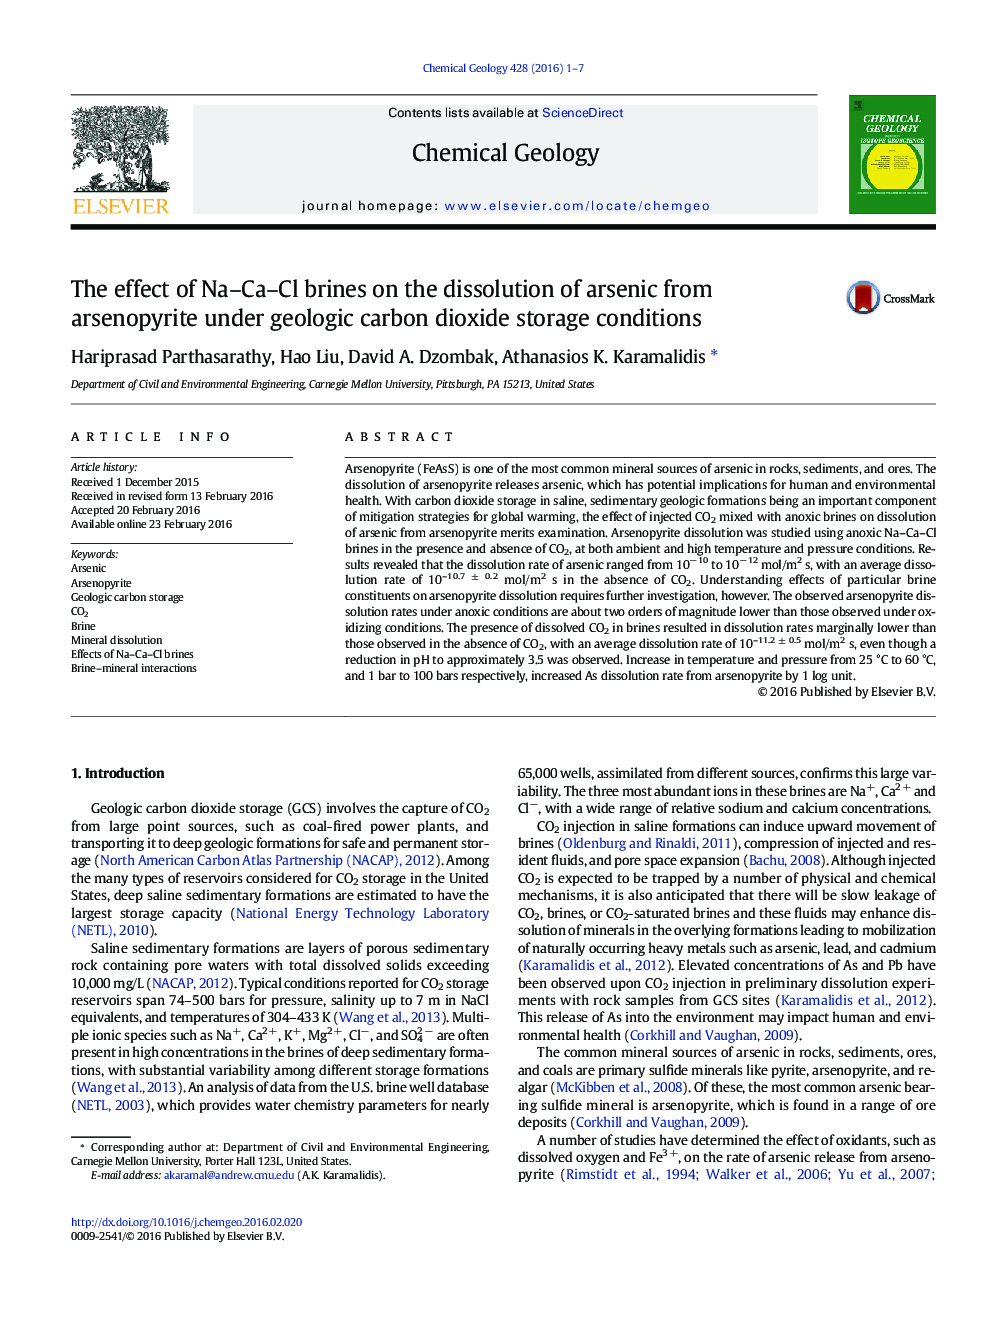 The effect of Na-Ca-Cl brines on the dissolution of arsenic from arsenopyrite under geologic carbon dioxide storage conditions